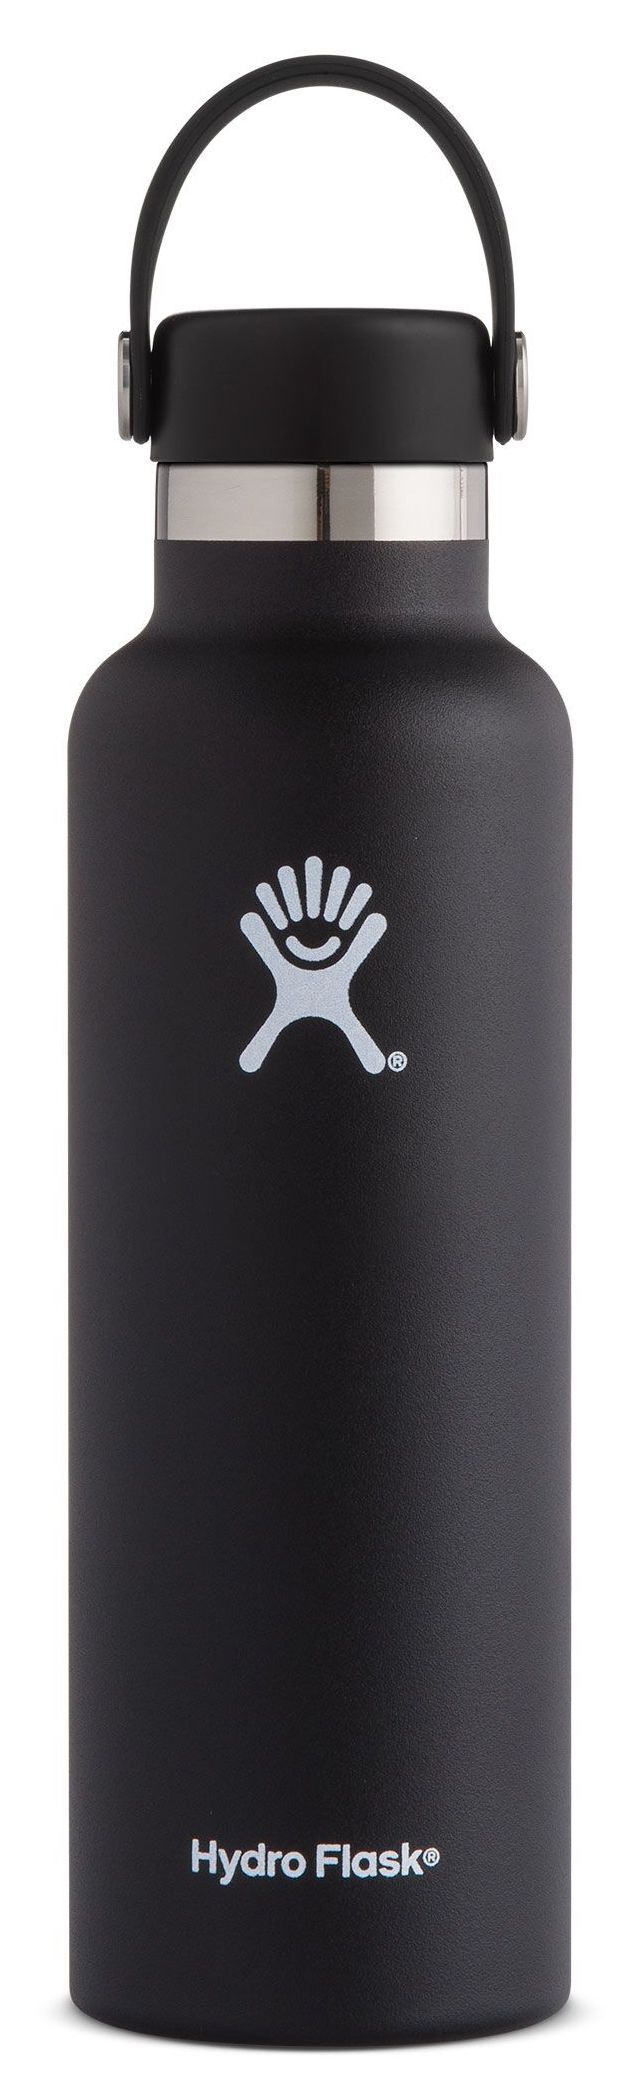 Hydro Flask 21 oz Standard Mouth - Isolierflasche 621 mL